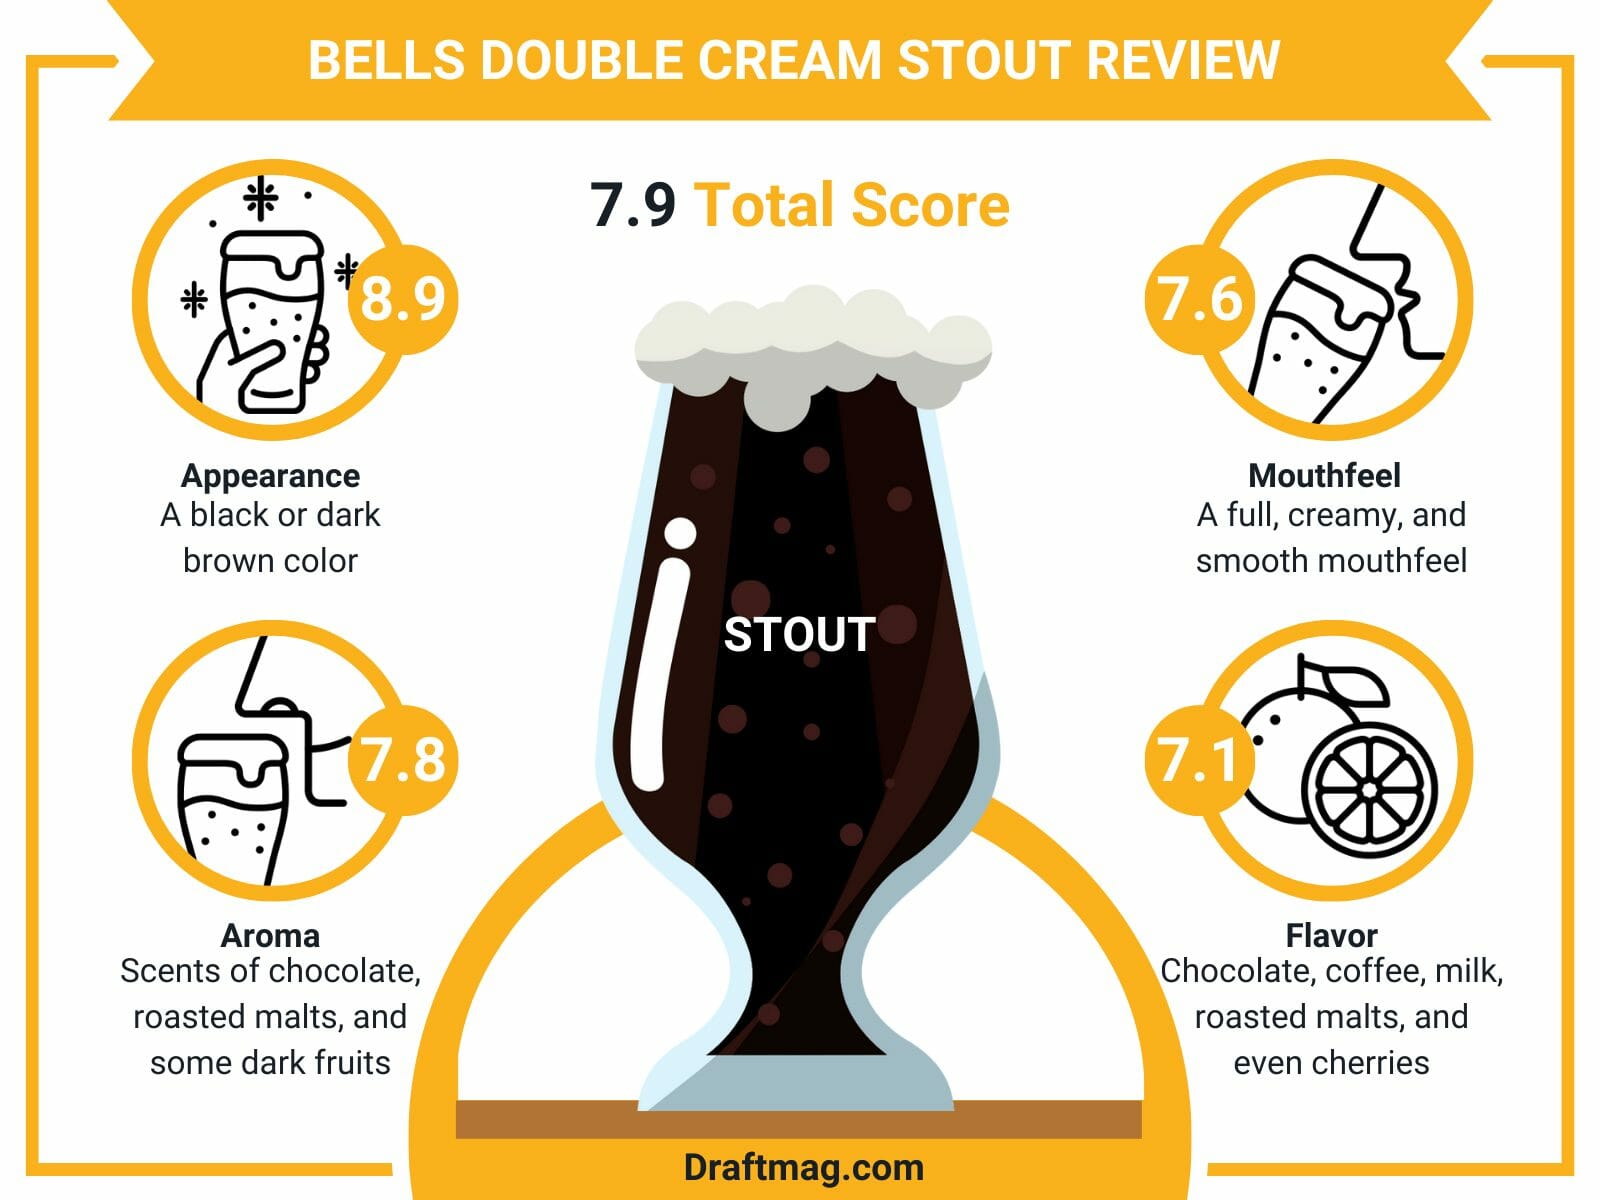 Bells Double Cream Review Infographic